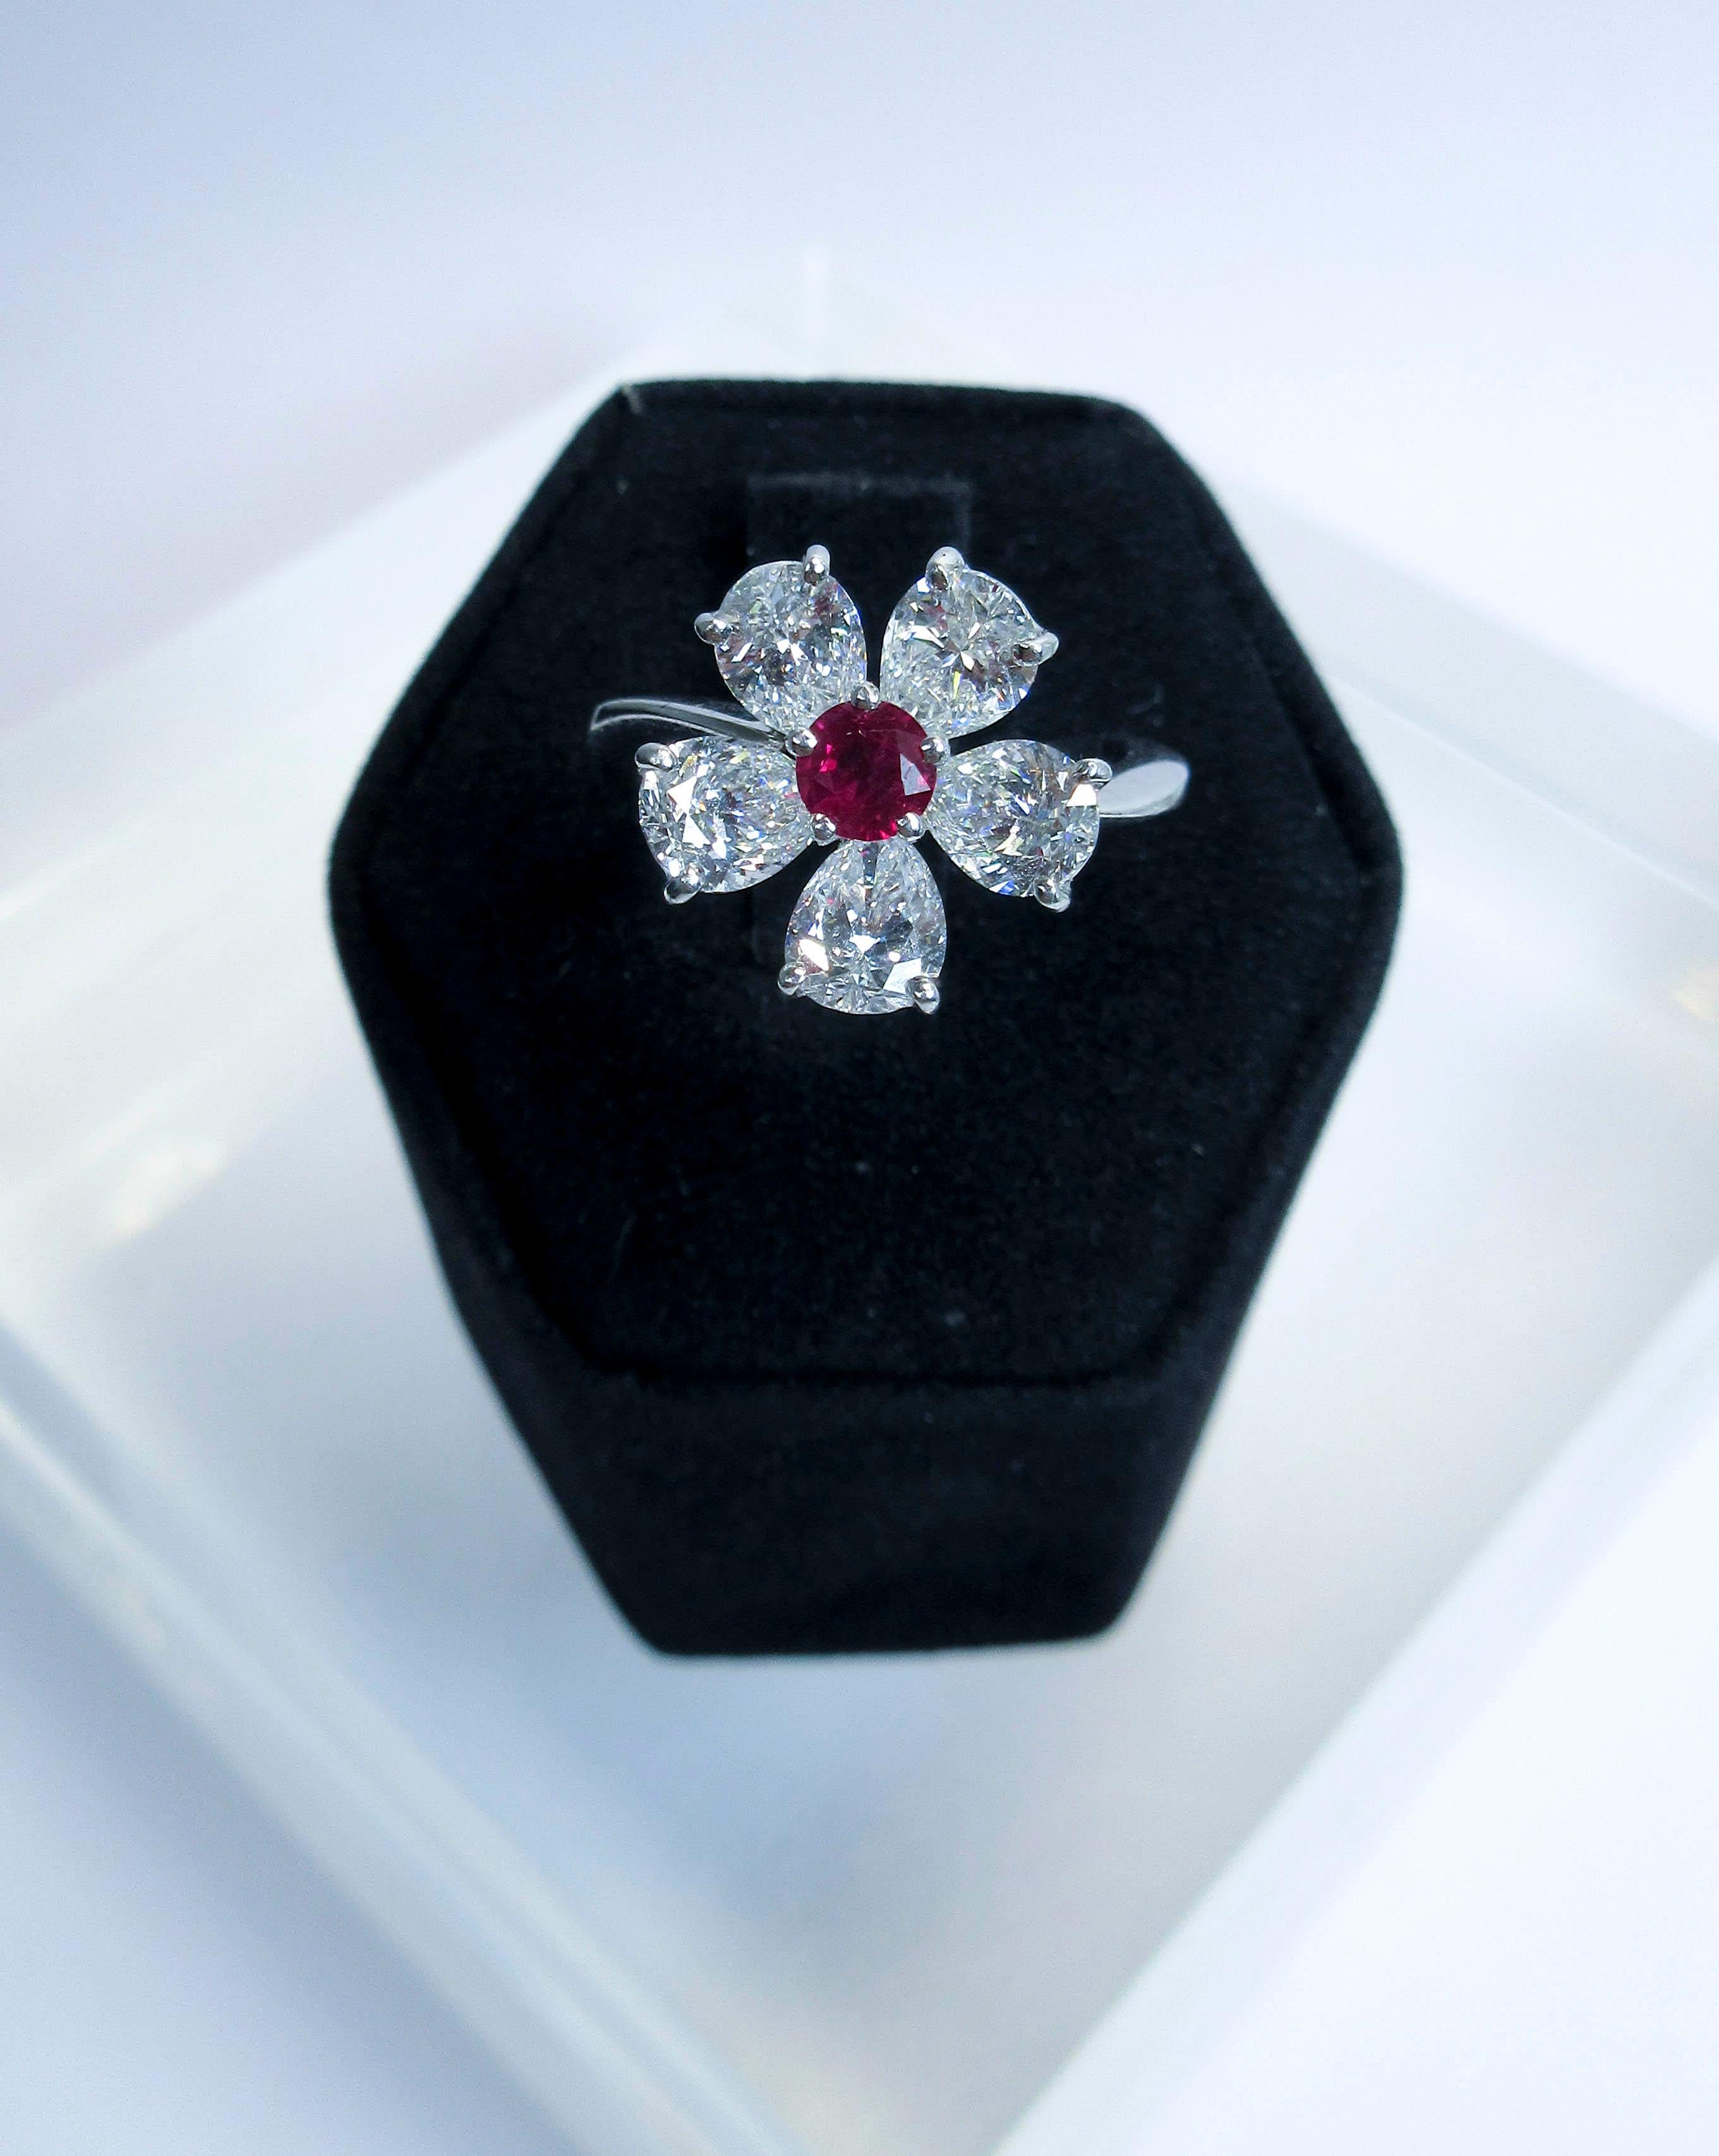 RARE
Graff, 18kt white gold, with 5 pear shape diamonds.
Diamonds 2.60cts.
Color E
Clarity VVS and VVS1
Natural untreated Ruby center stone 0.28cts.  